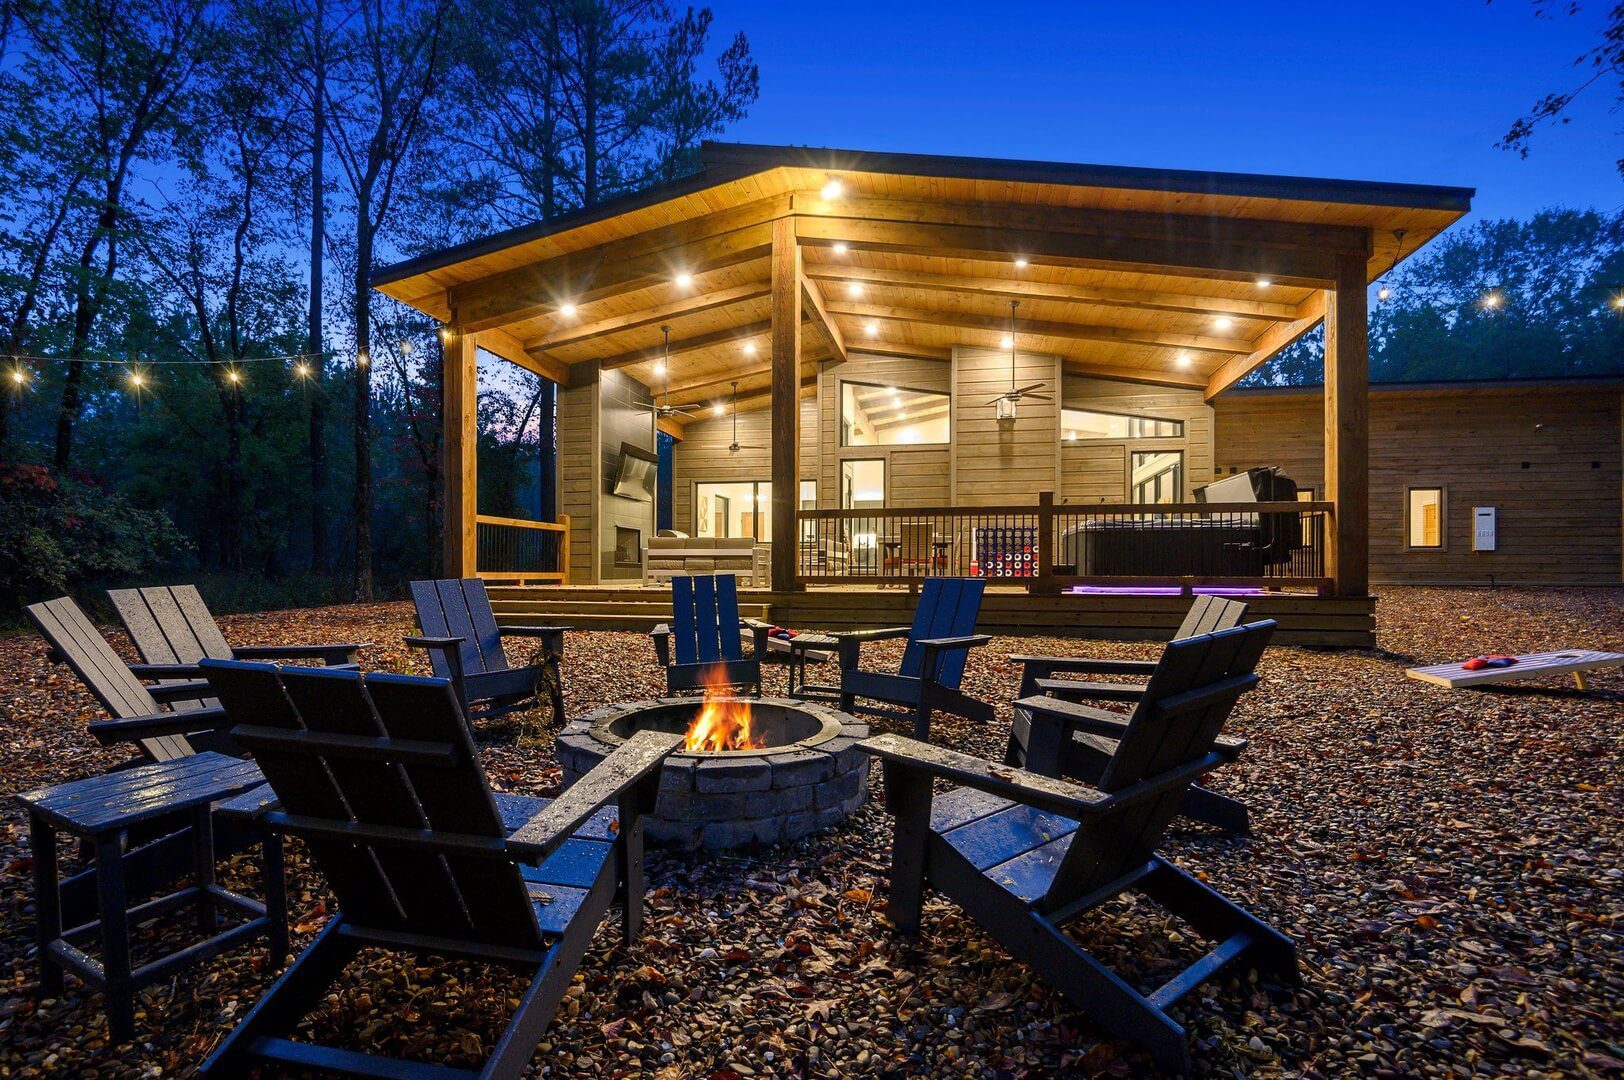 The backyard area, complete with fire pit, of one of the top Hochatown cabin rentals.